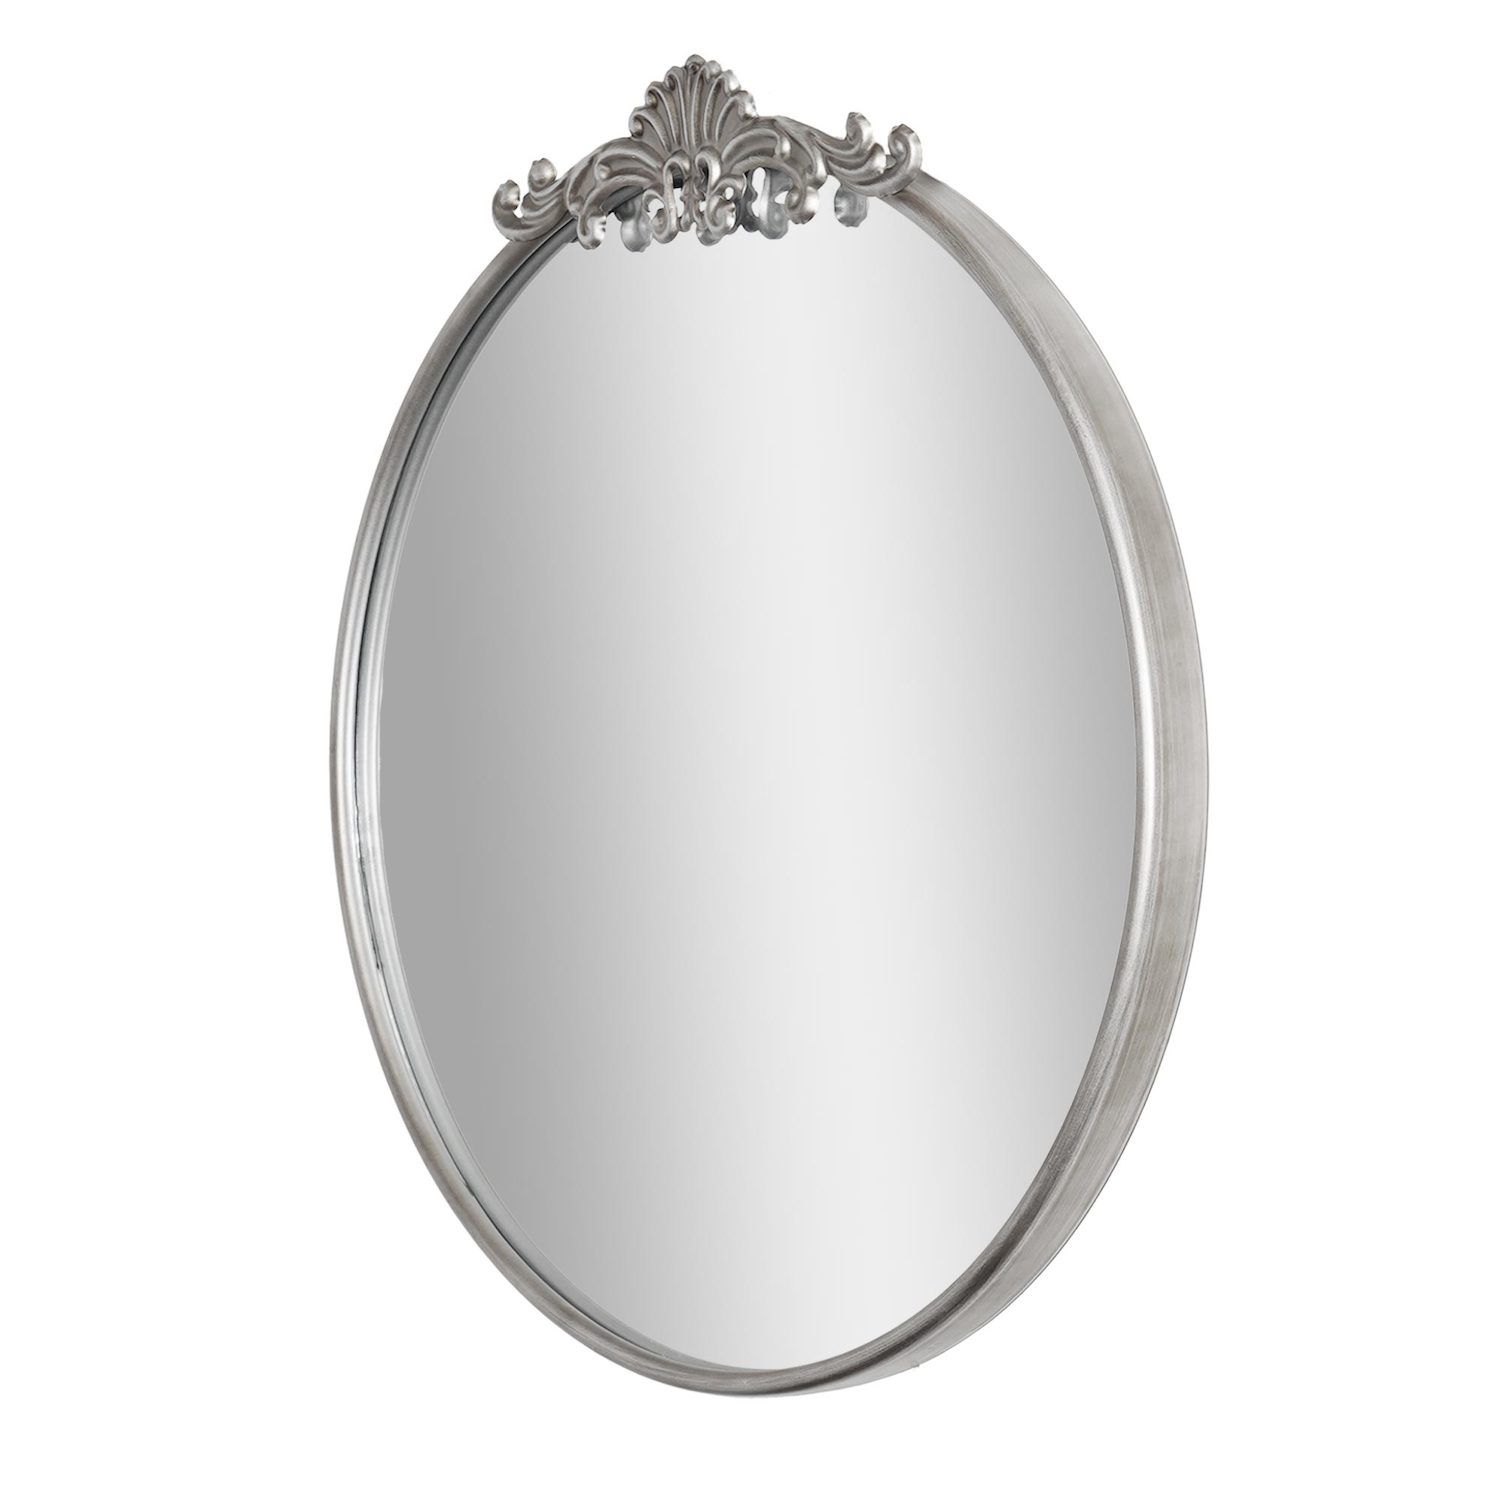 Image for Head West Antique Pewter Ornate Metal Wall Mirror at Kohl's.